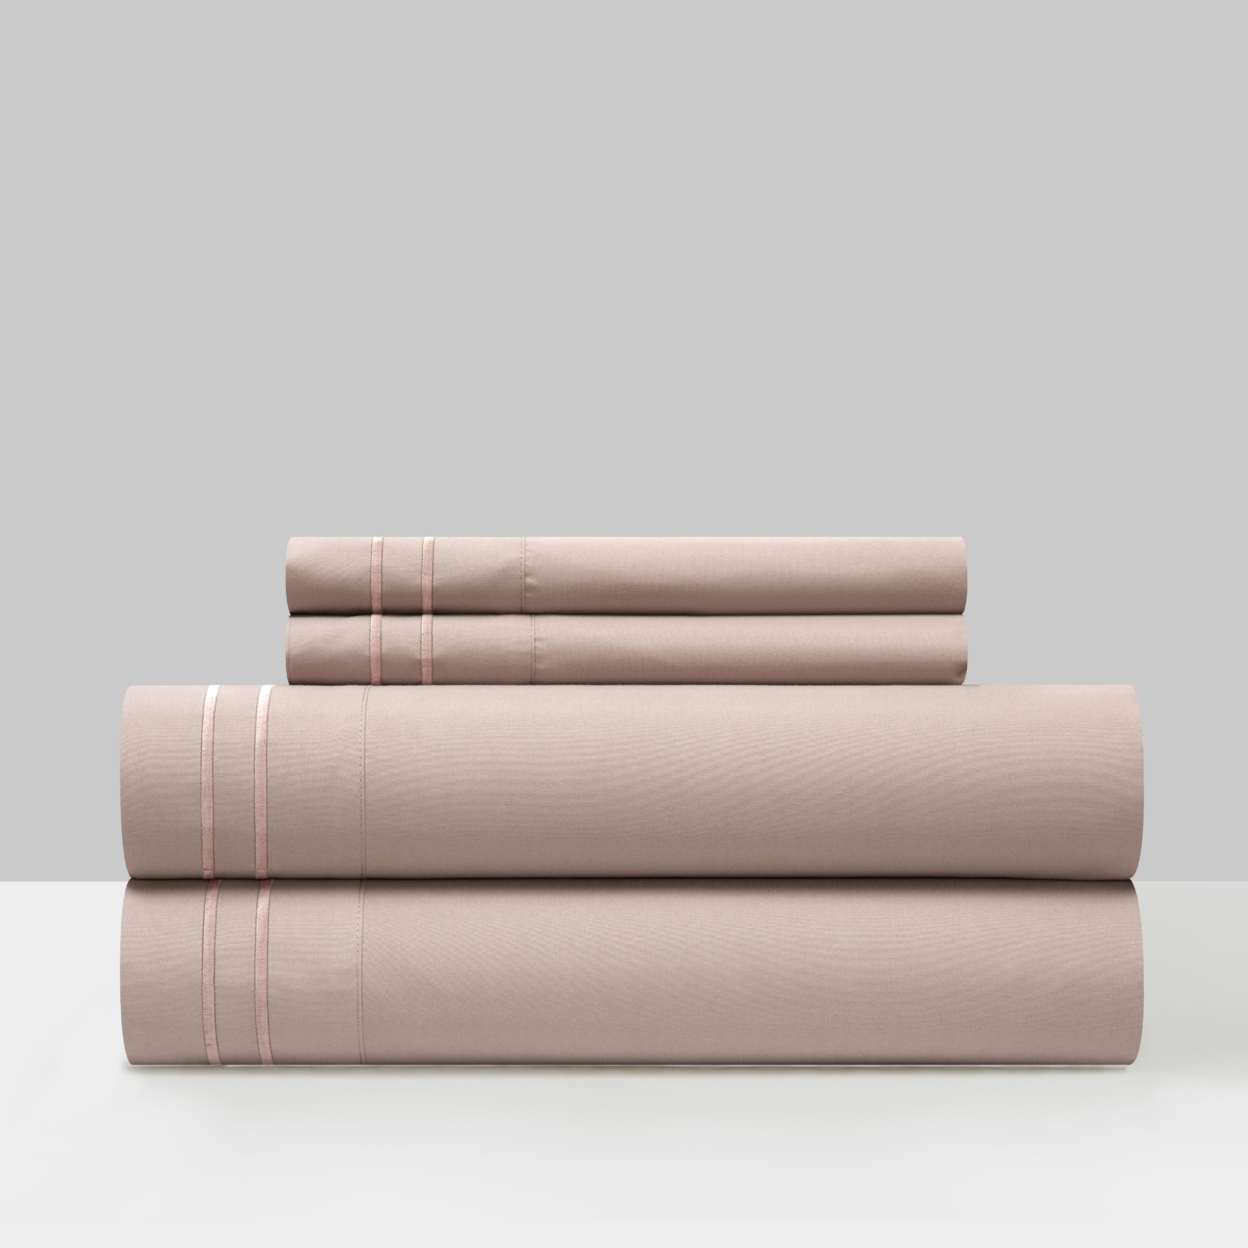 Vina 3 Or 4 Piece Sheet Set Solid Color With Dual Stripe Embroidery - Rose, King